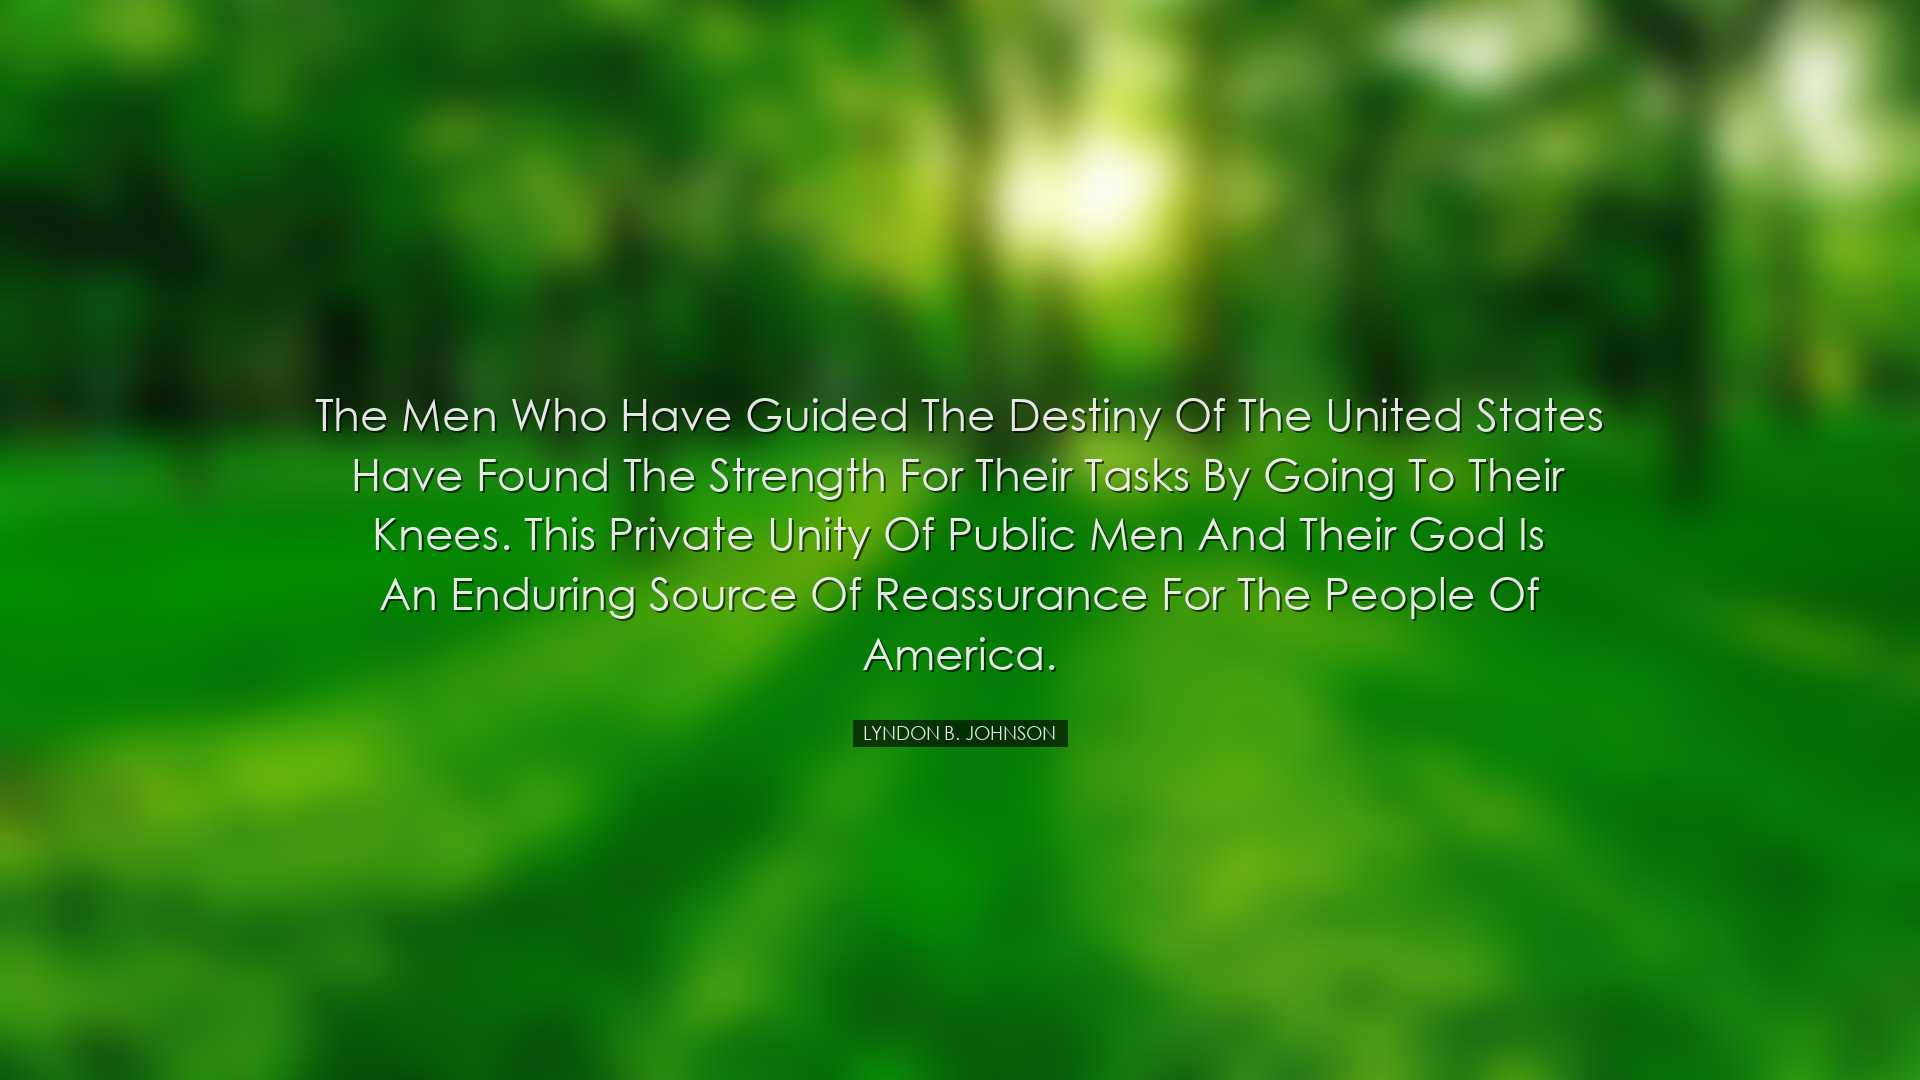 The men who have guided the destiny of the United States have foun